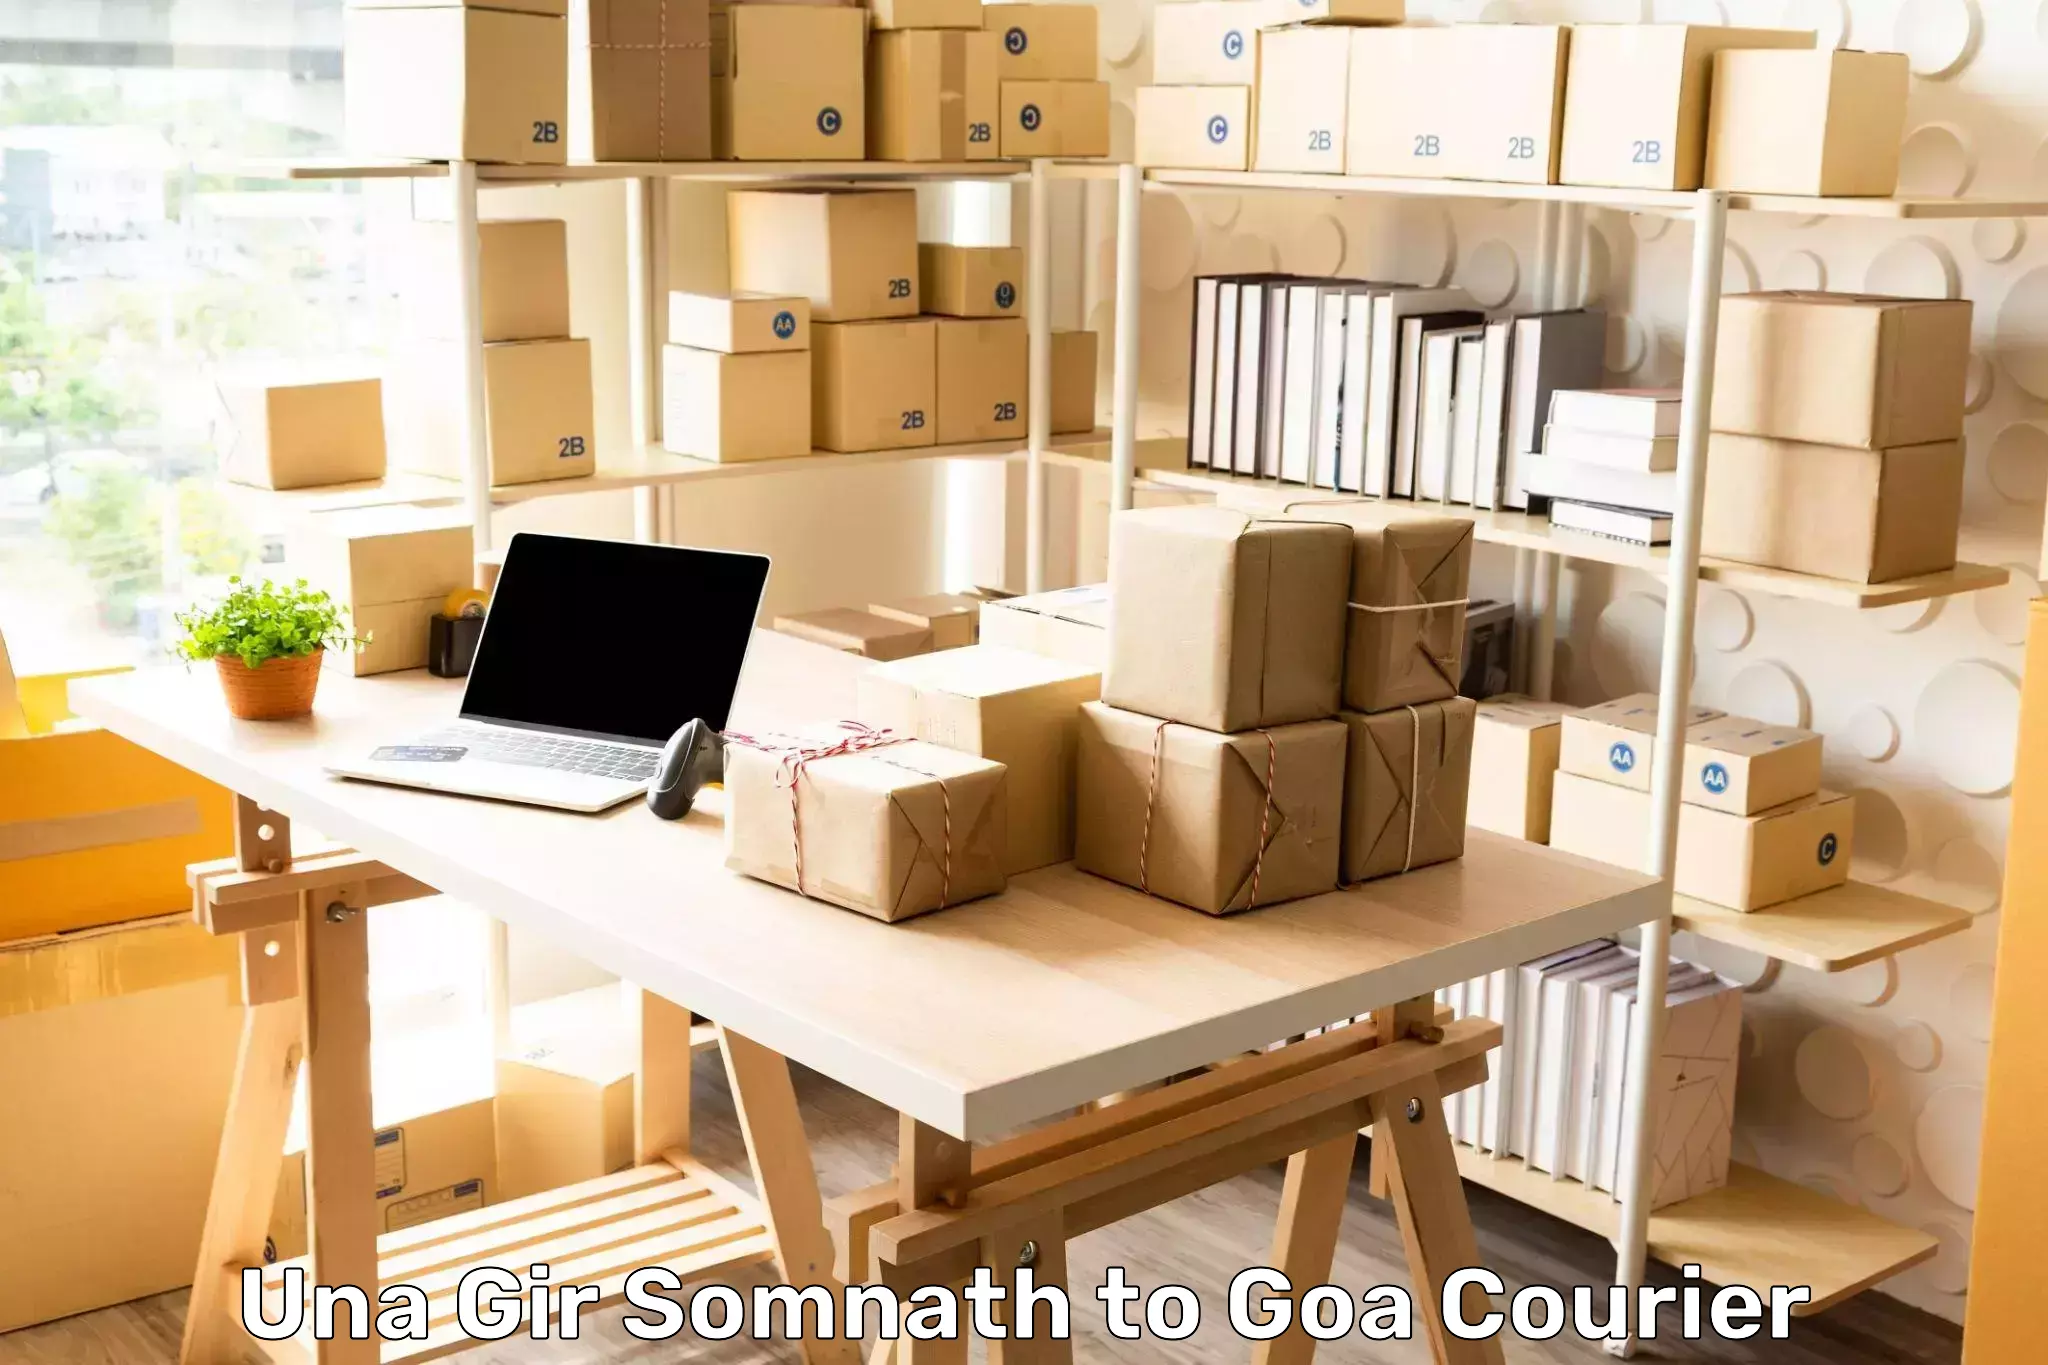 Courier service innovation in Una Gir Somnath to Margao